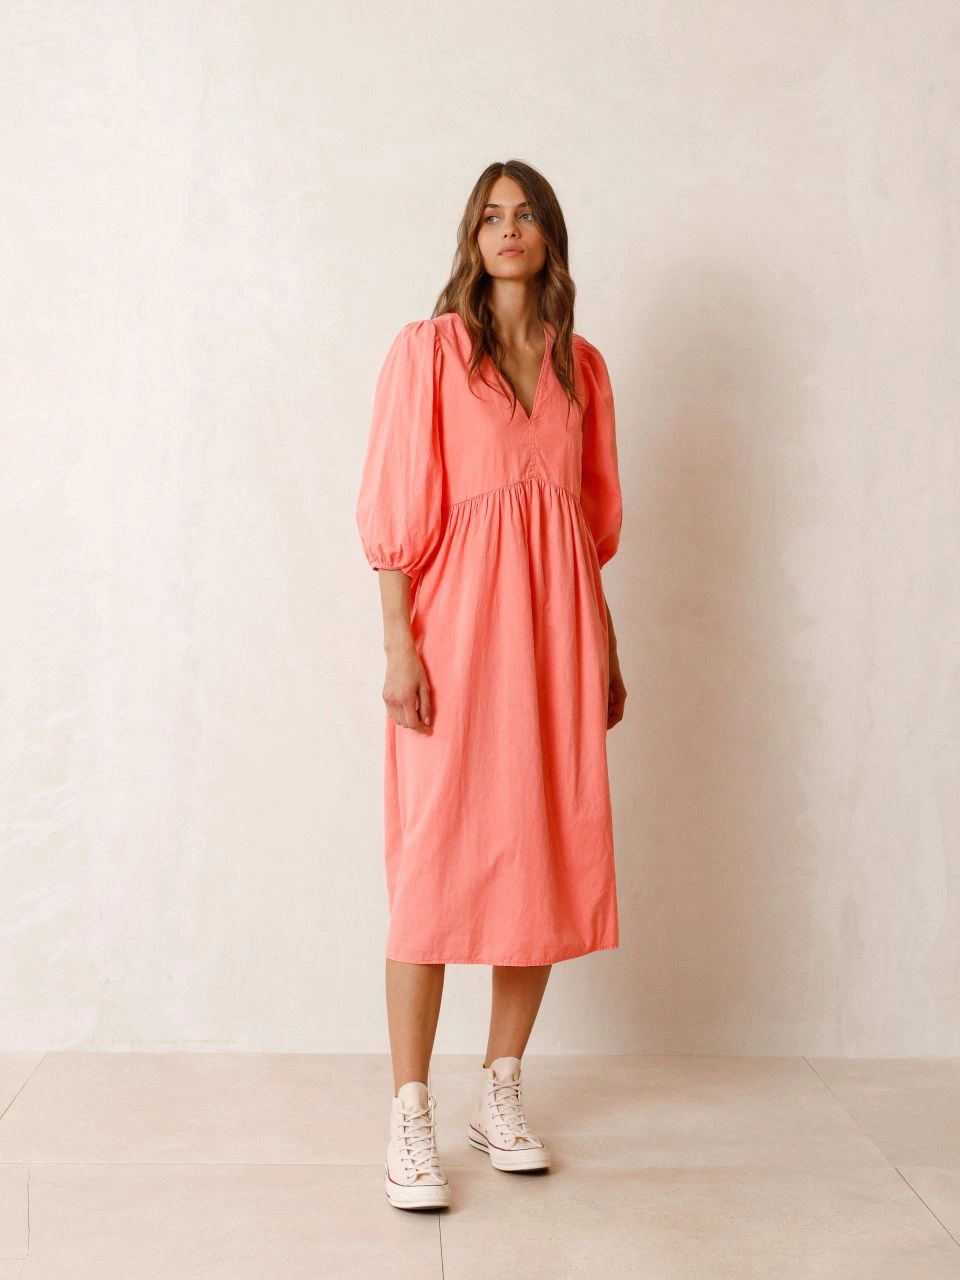 indi&amp;cold - FLOWY BECA DRESS IN GARMENT-DYED COTTON LINEN - Acid Pink 6